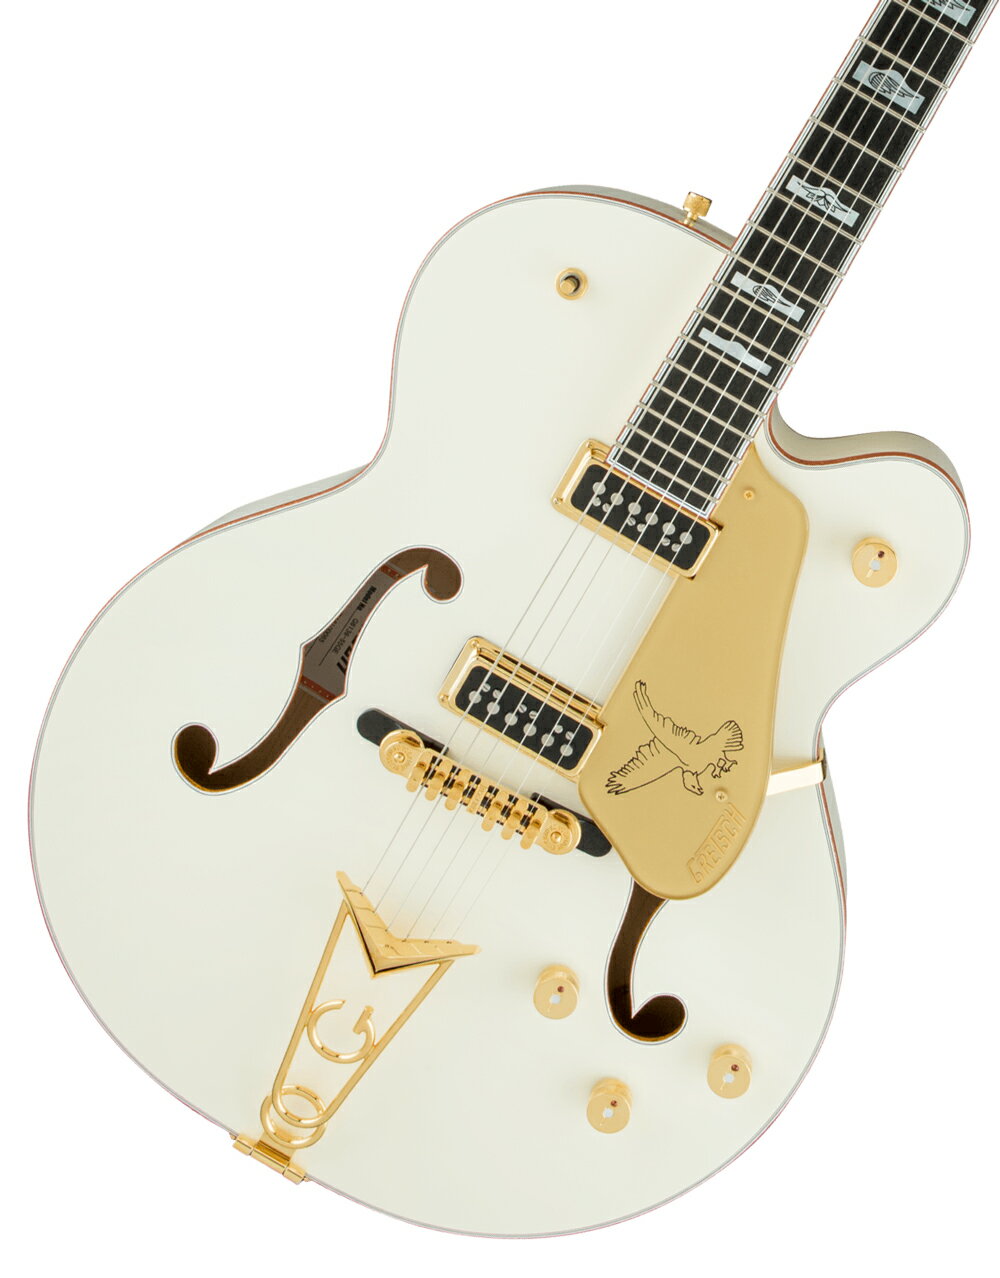 Gretsch / G6136-55 Vintage Select Edition '55 Falcon Hollow Body with Cadillac Tailpiece Vintage White Lacquer グレッチ【YRK】《+4582600680067》